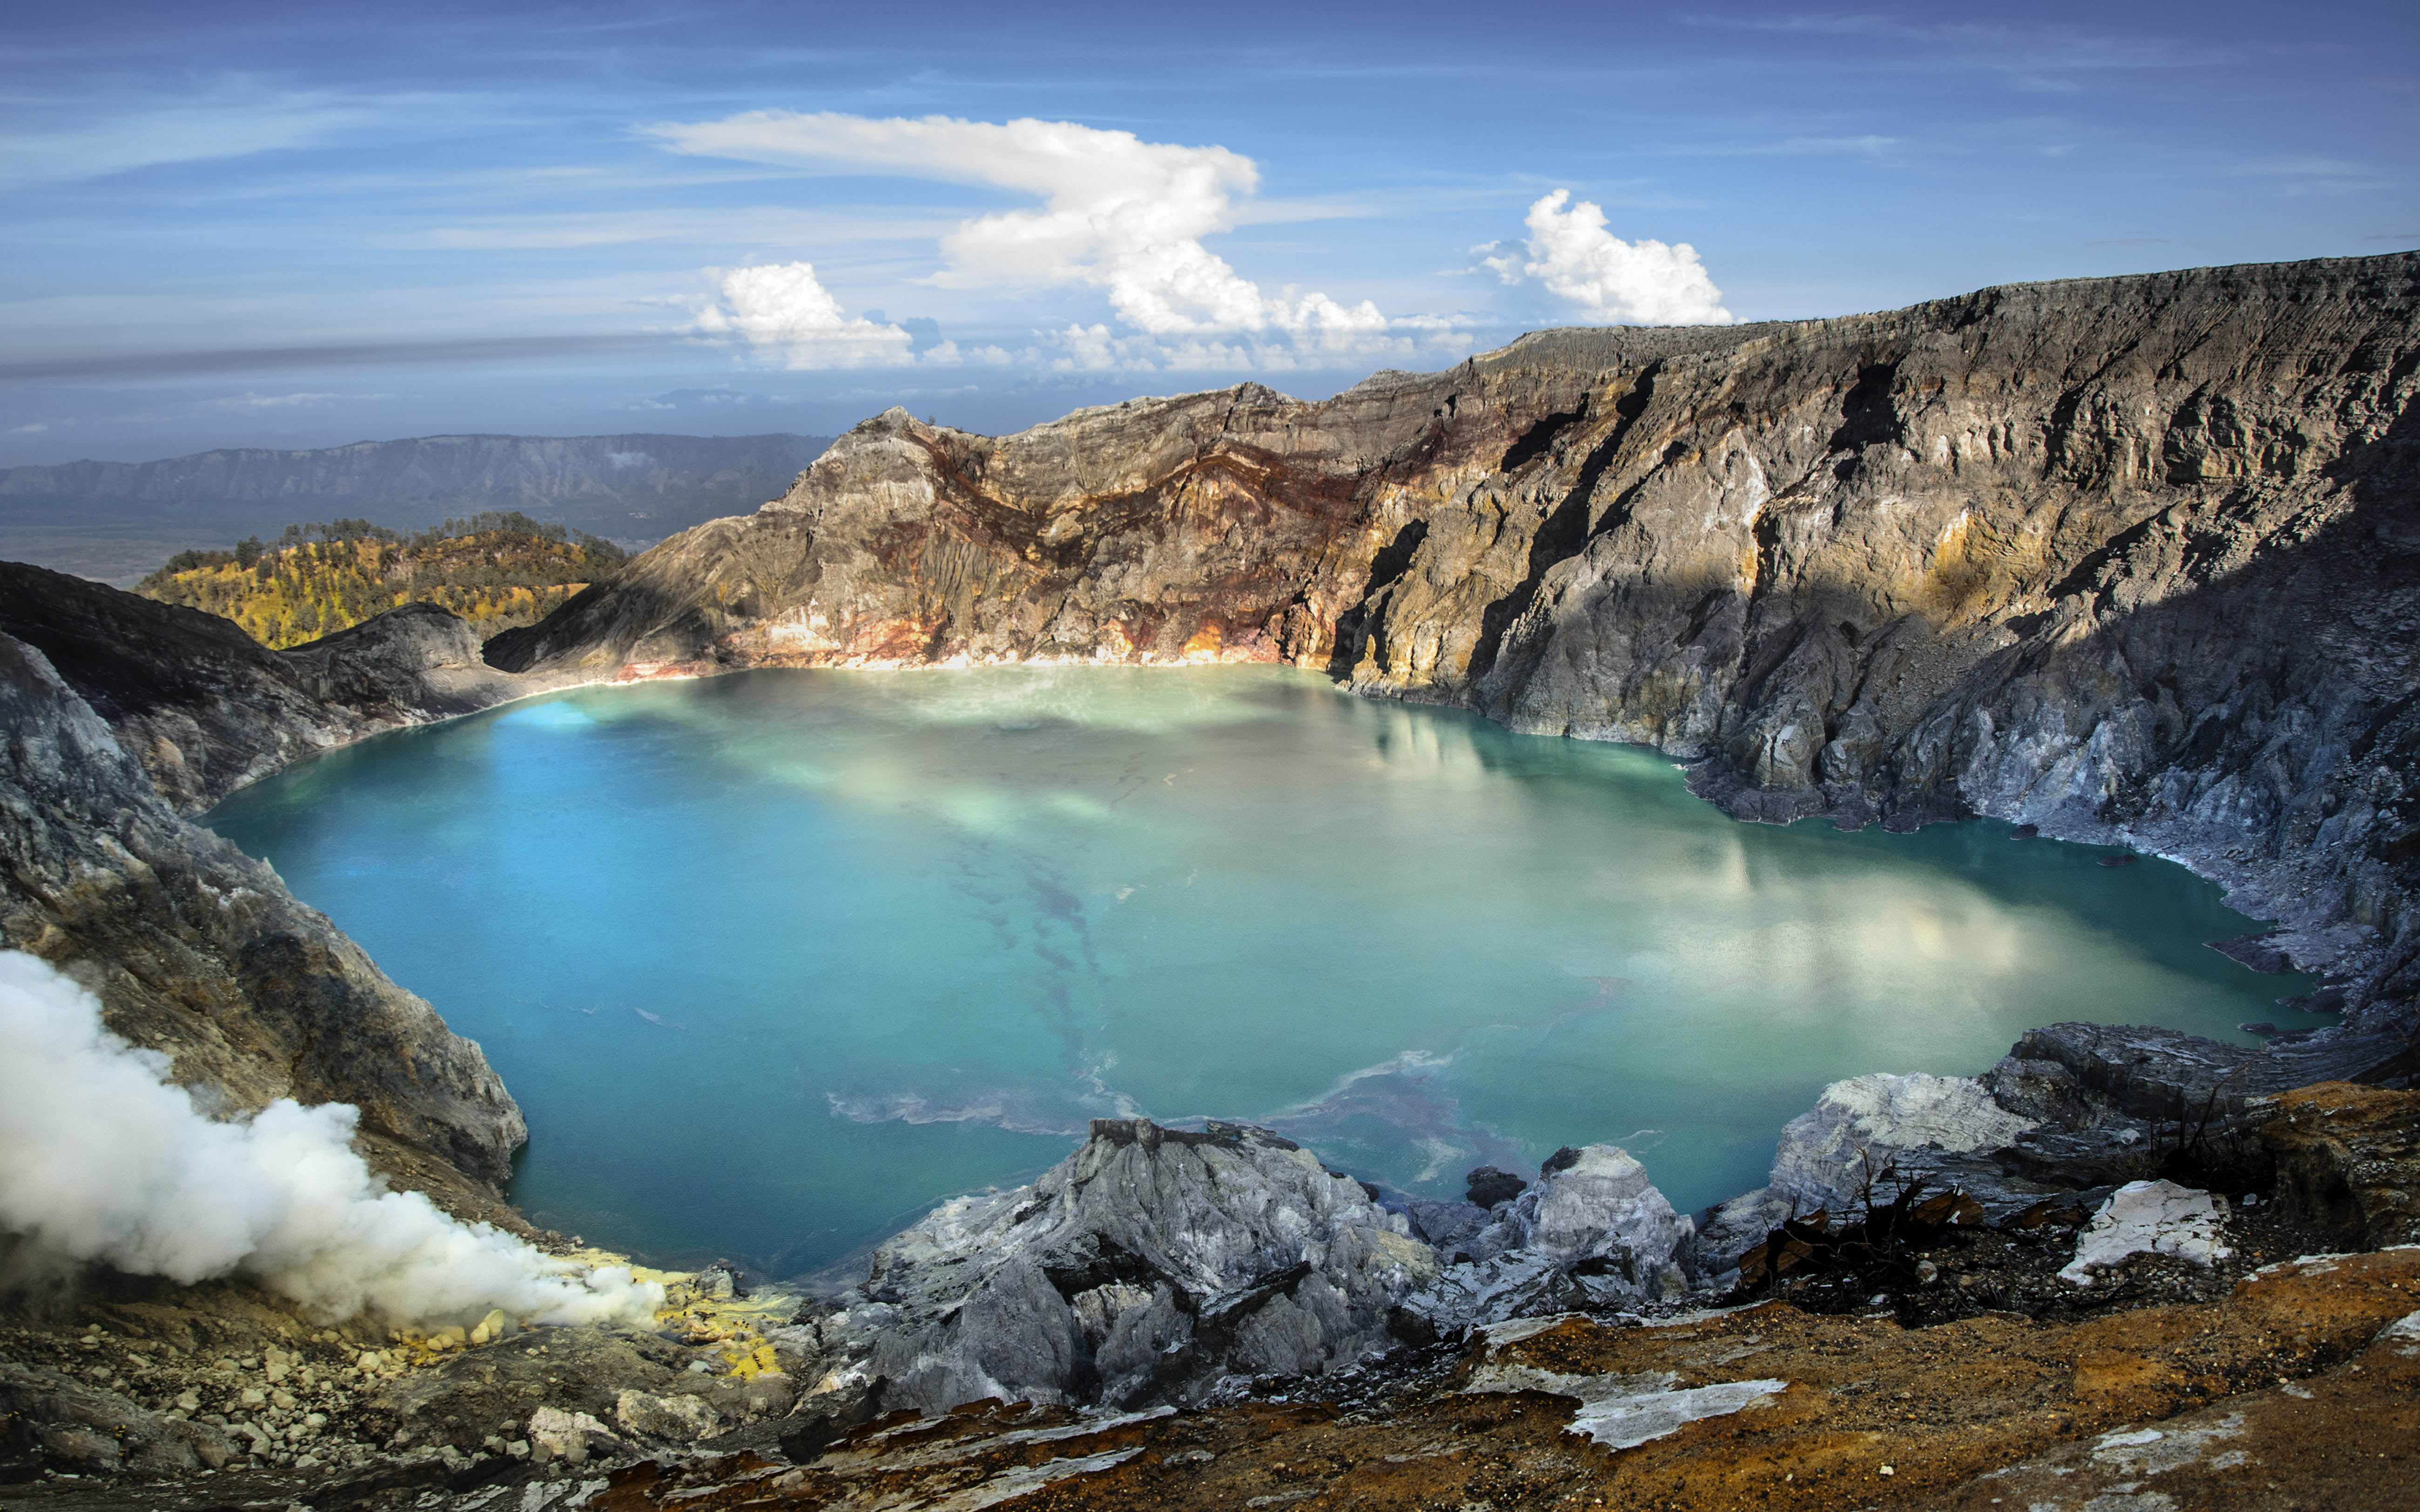 Kawah Ijen Volcano Complex Of East Java Indonesia Is A Group Of Composite Volcanoes In The Banyuwangi Regency Wallpaper Hd 5200×3250